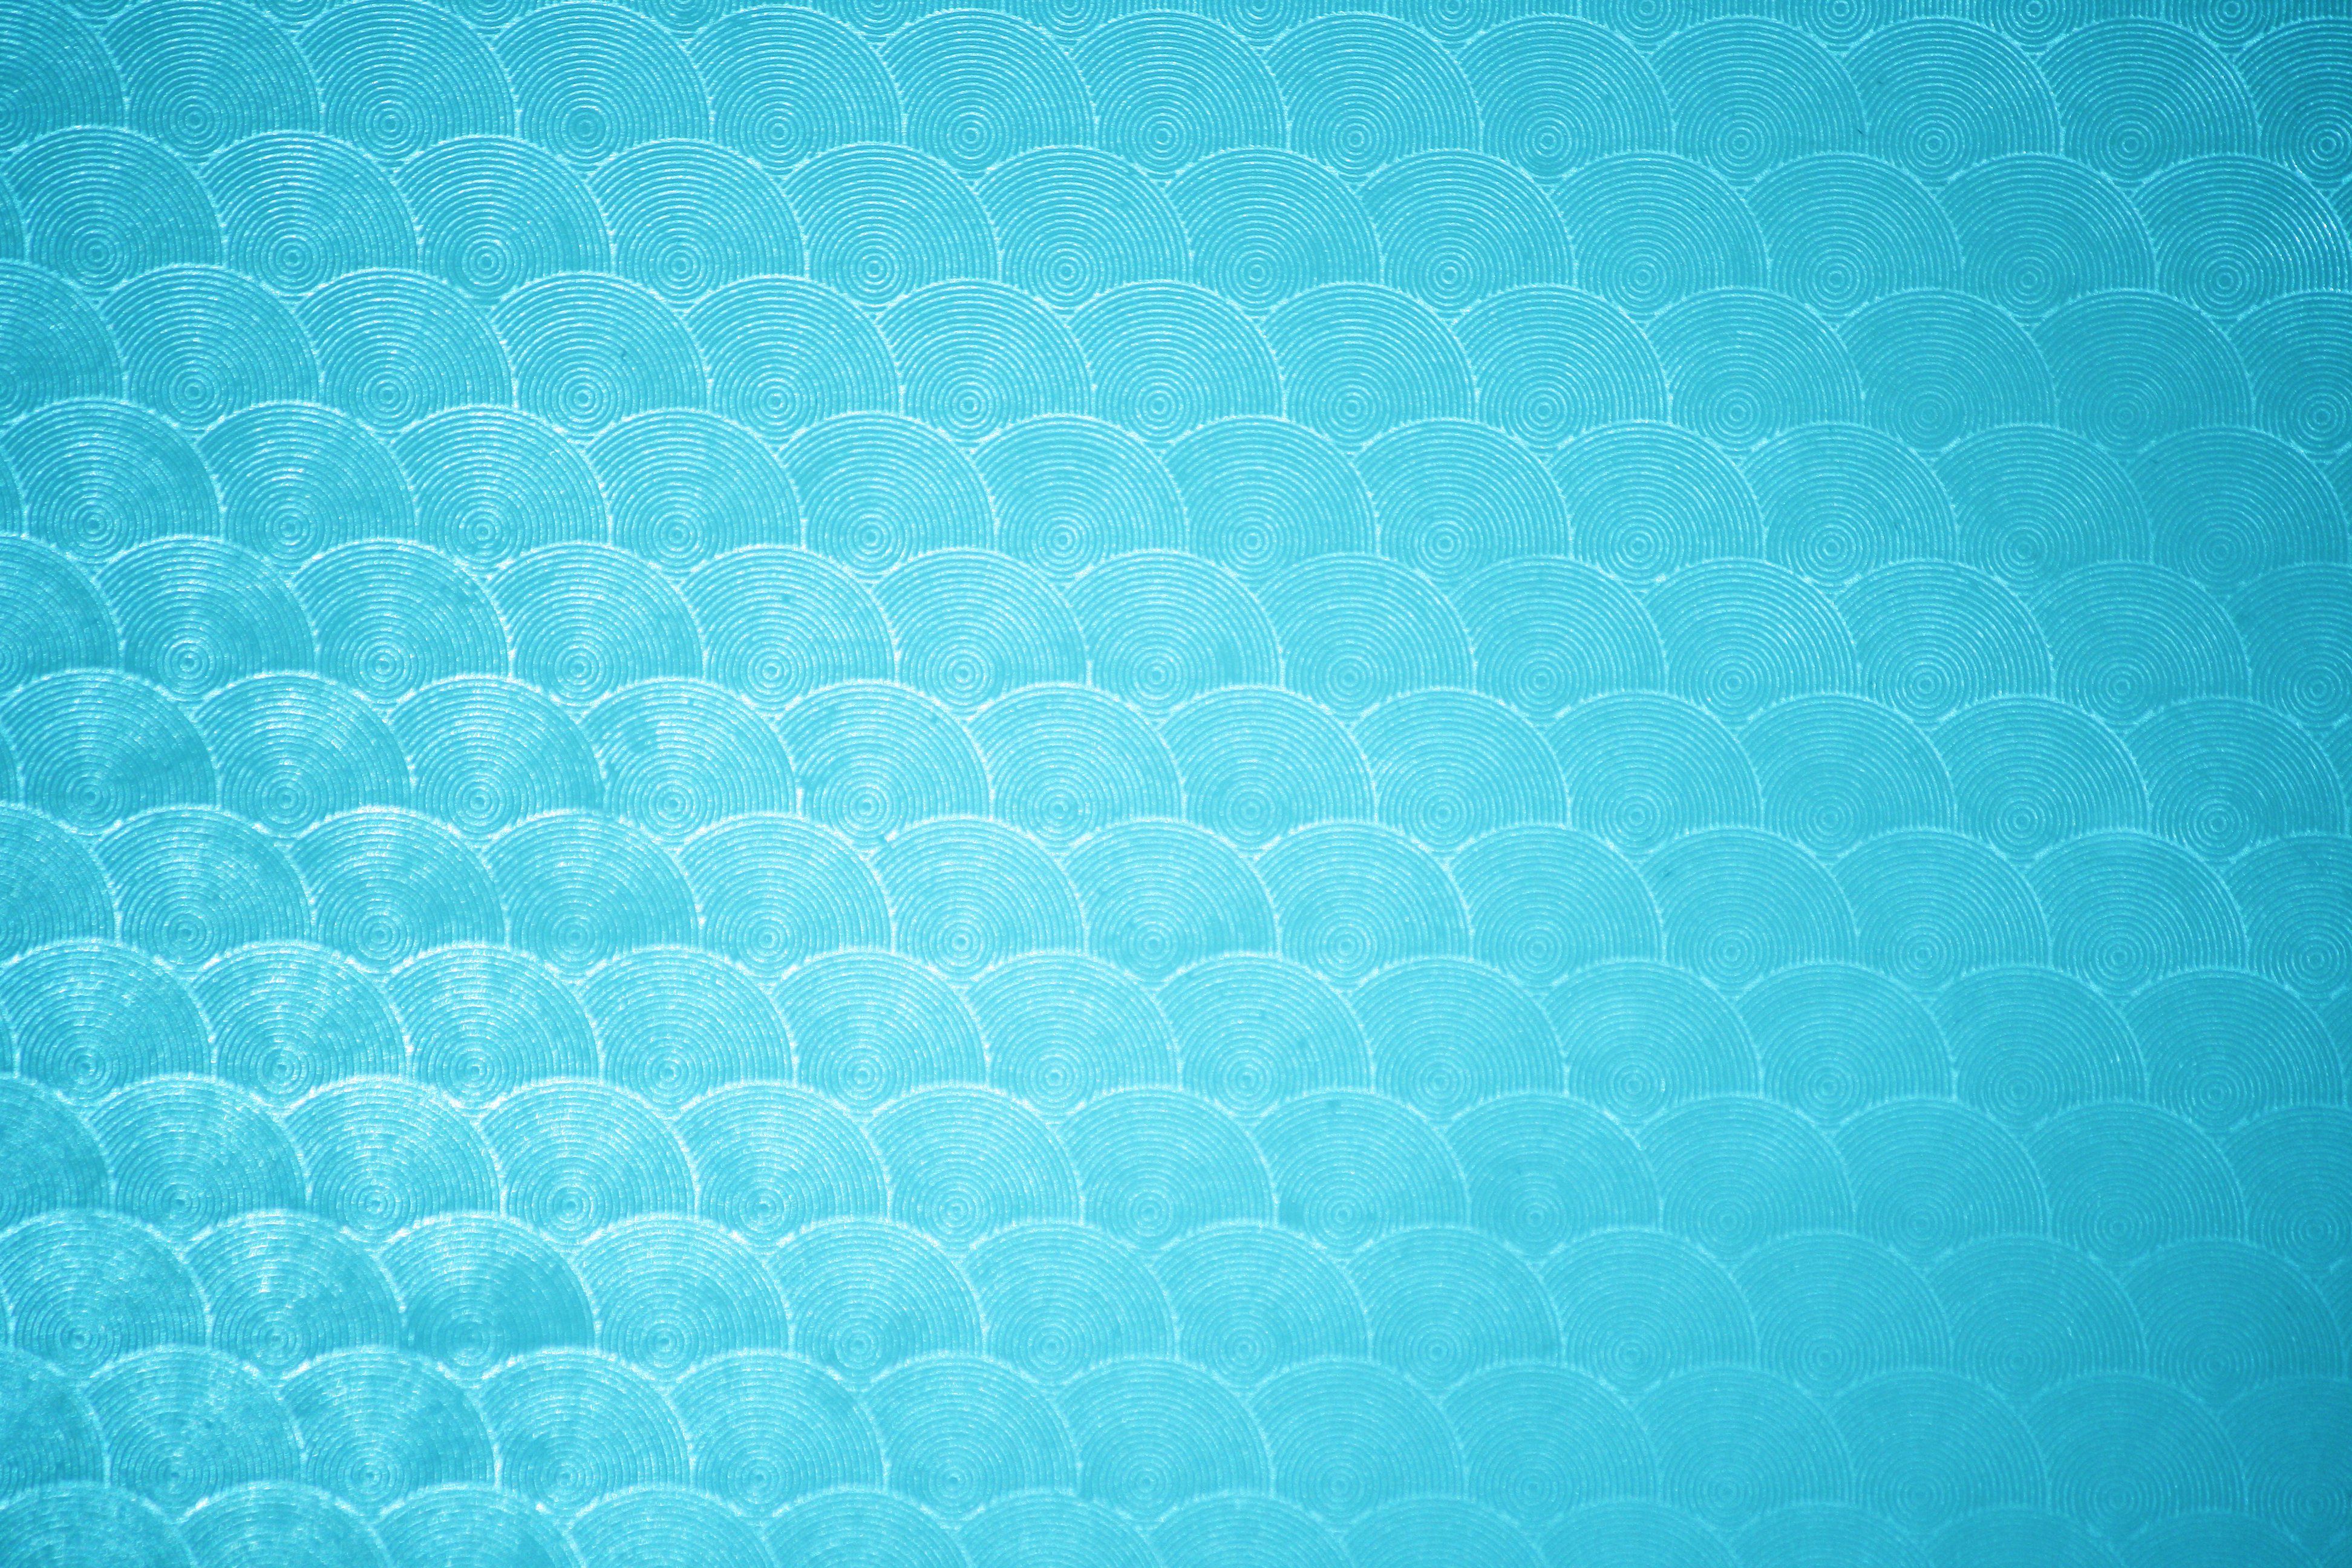 Turquoise Textured Wallpaper Background & Wallpaper